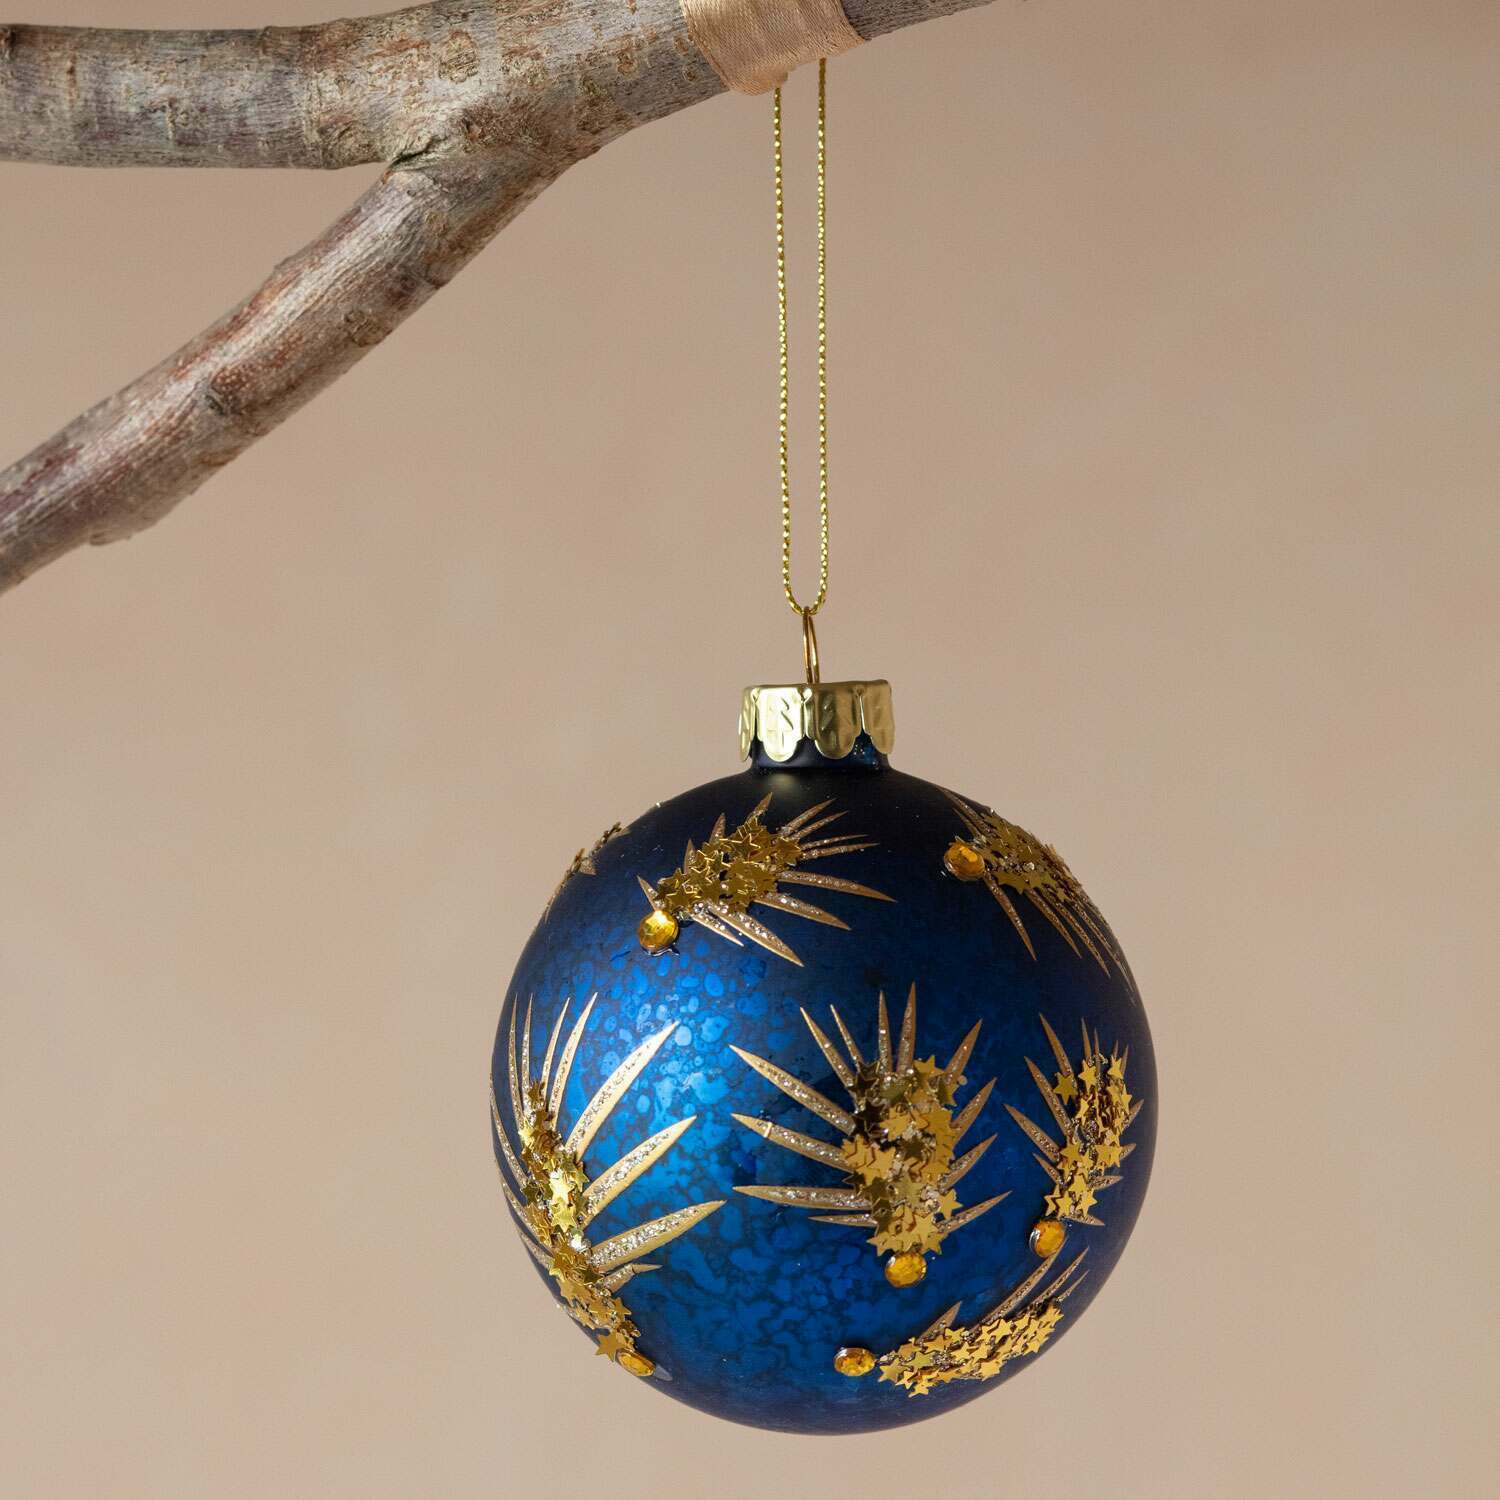 Gold and Midnight Blue Christmas Tree Bauble - image 1